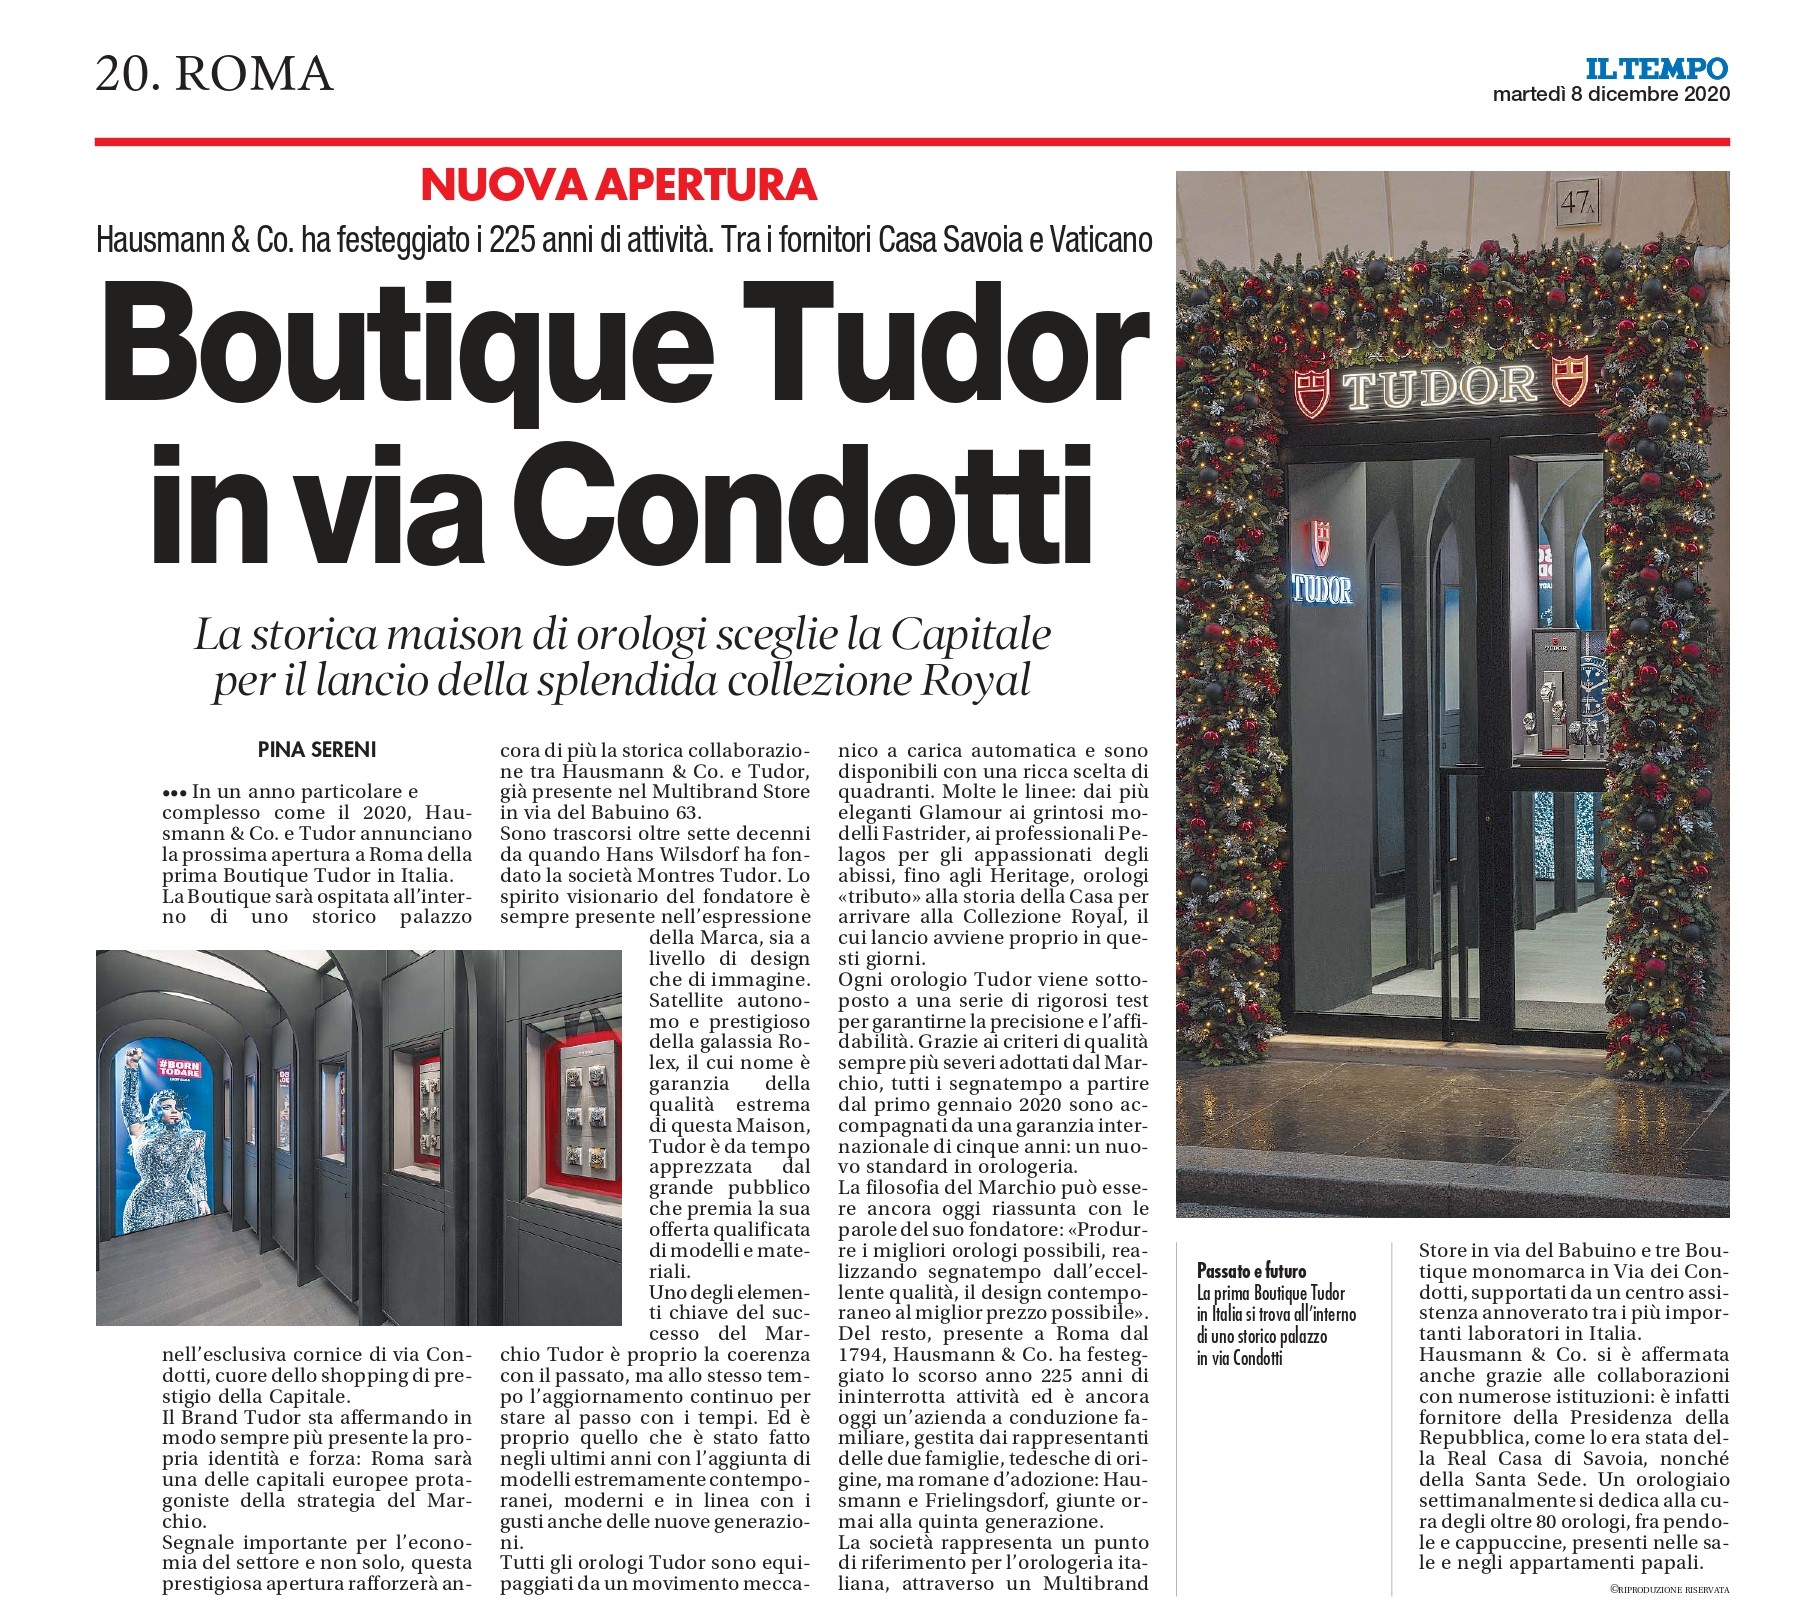 The opening of the first Tudor Boutique in Europe